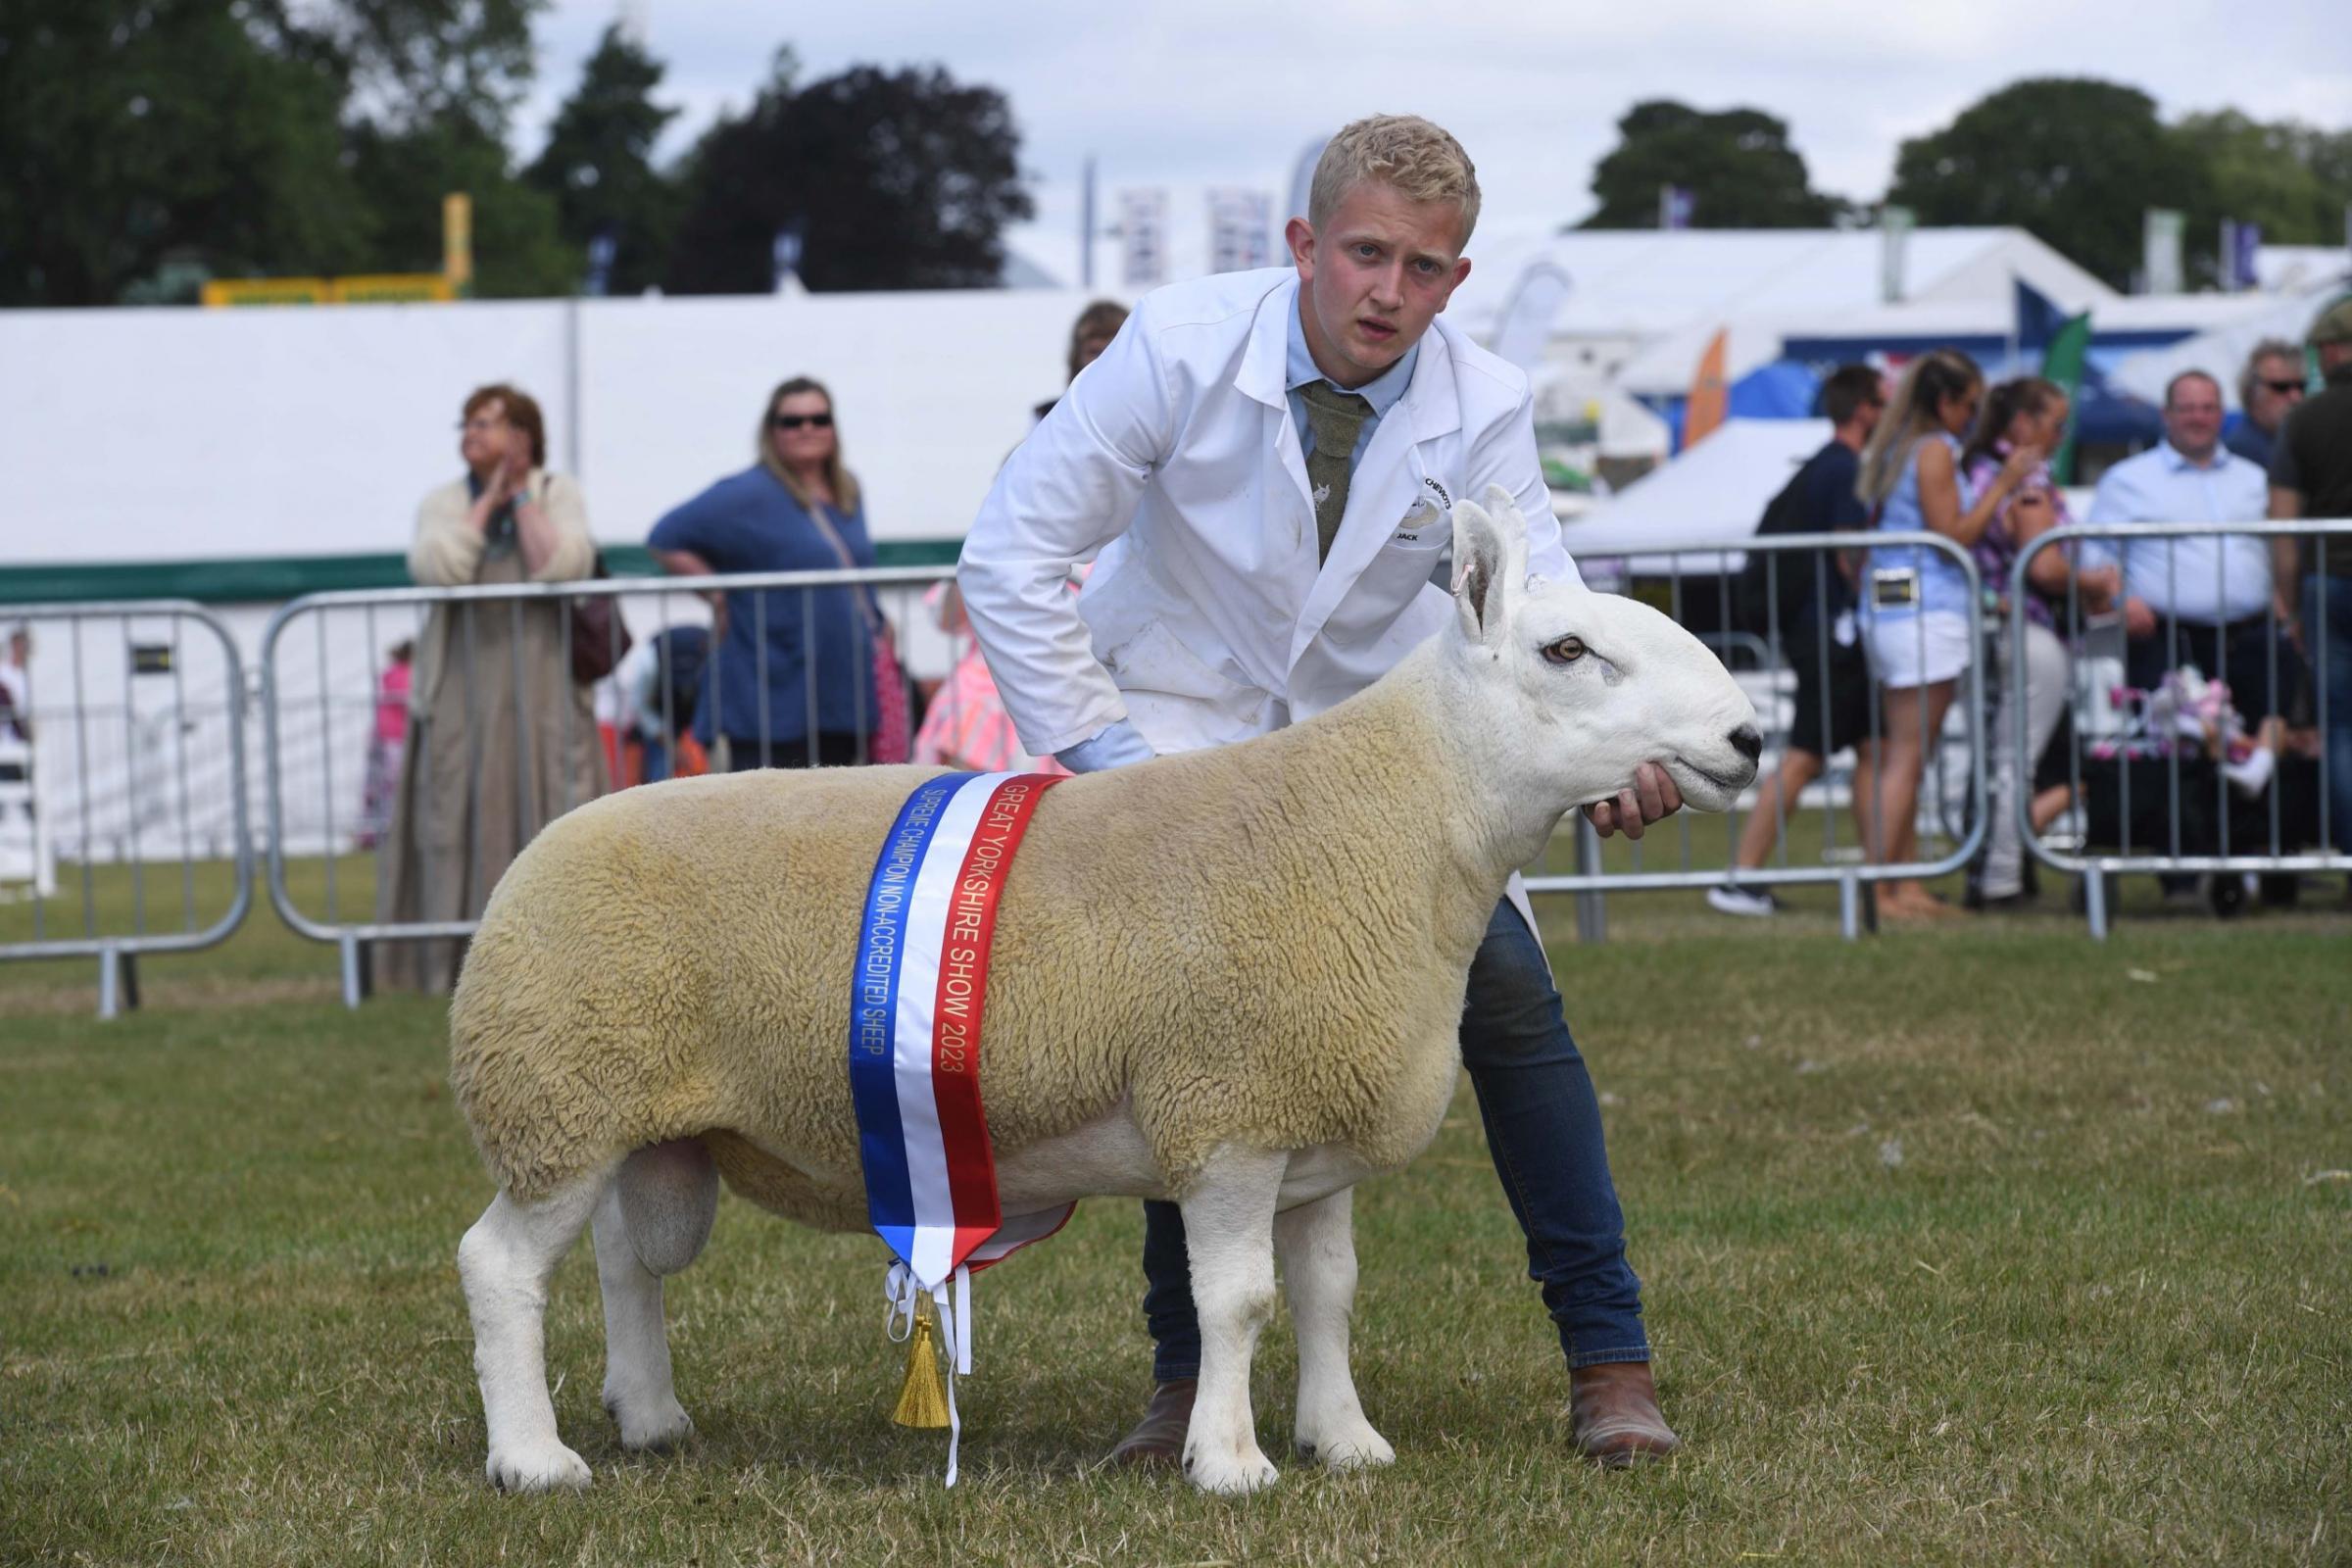 Non MV Supreme Champion. Jack Webster from Derbyshire with his Ram Shearling or Over, North Country Cheviot sheep